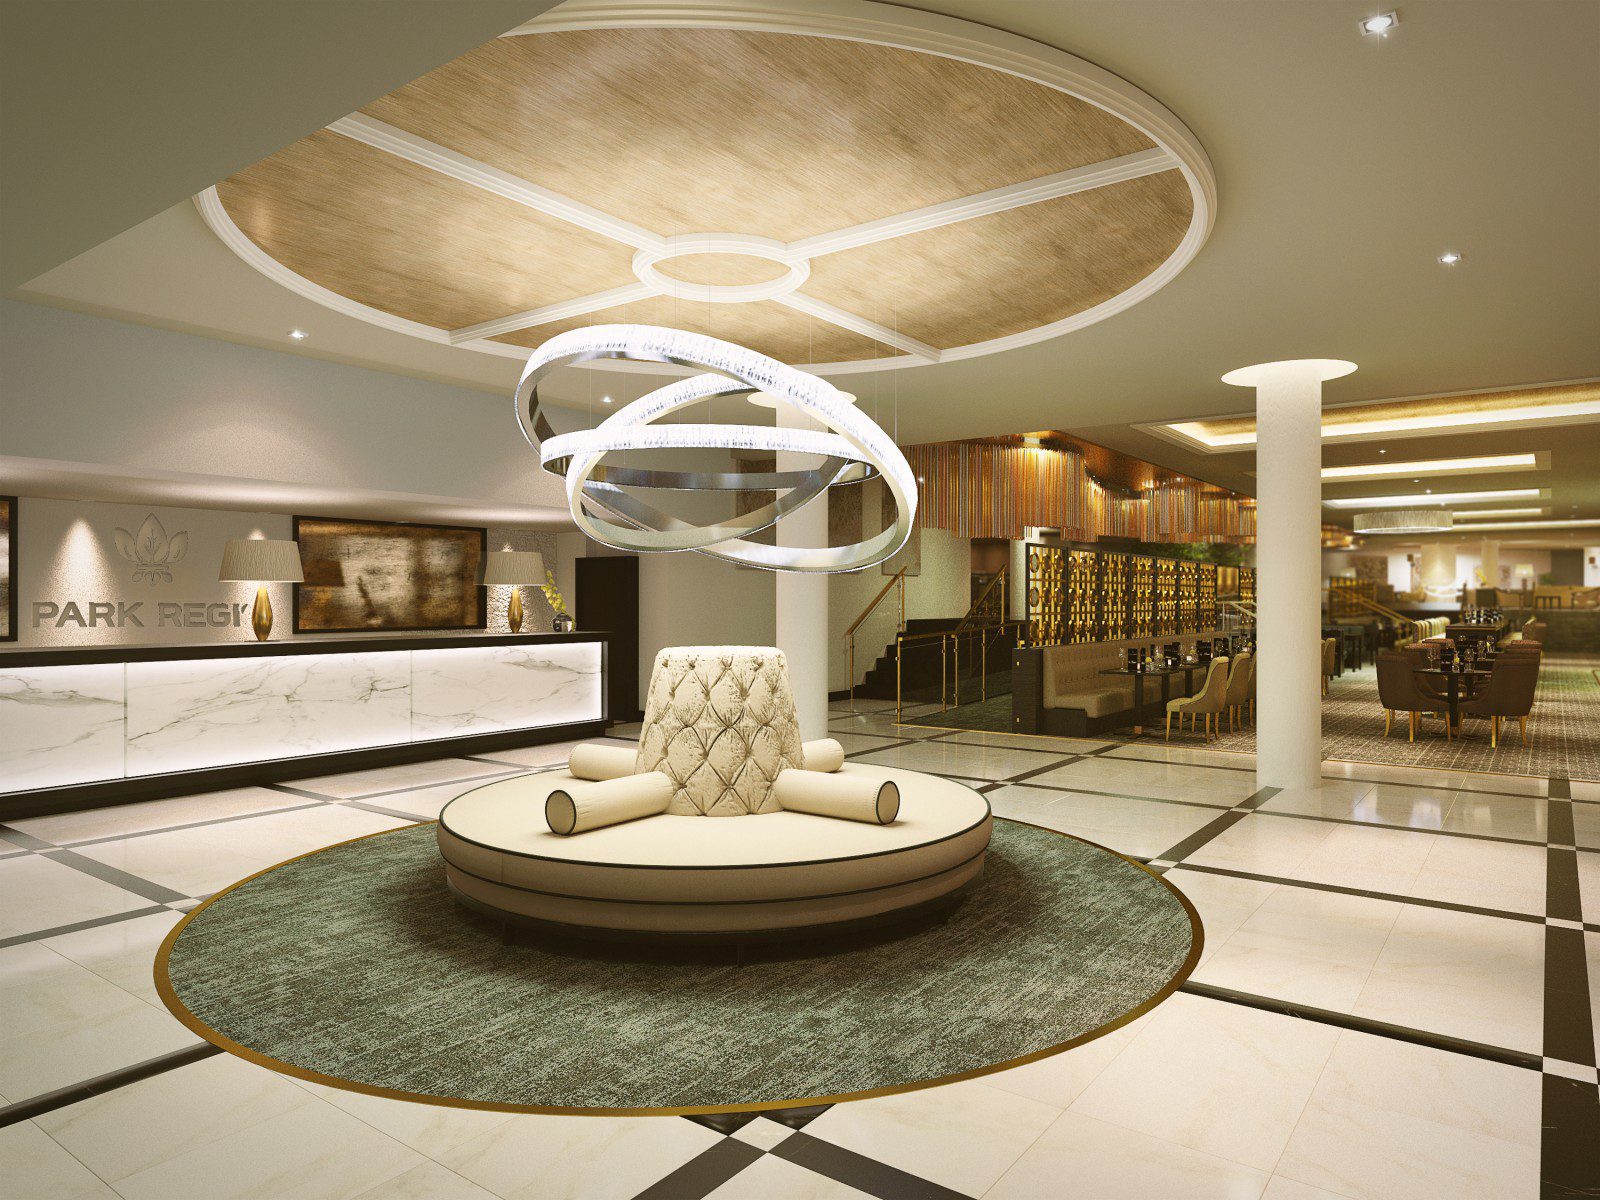 Park Regis Birmingham to Greet Its First Guests on 29 March